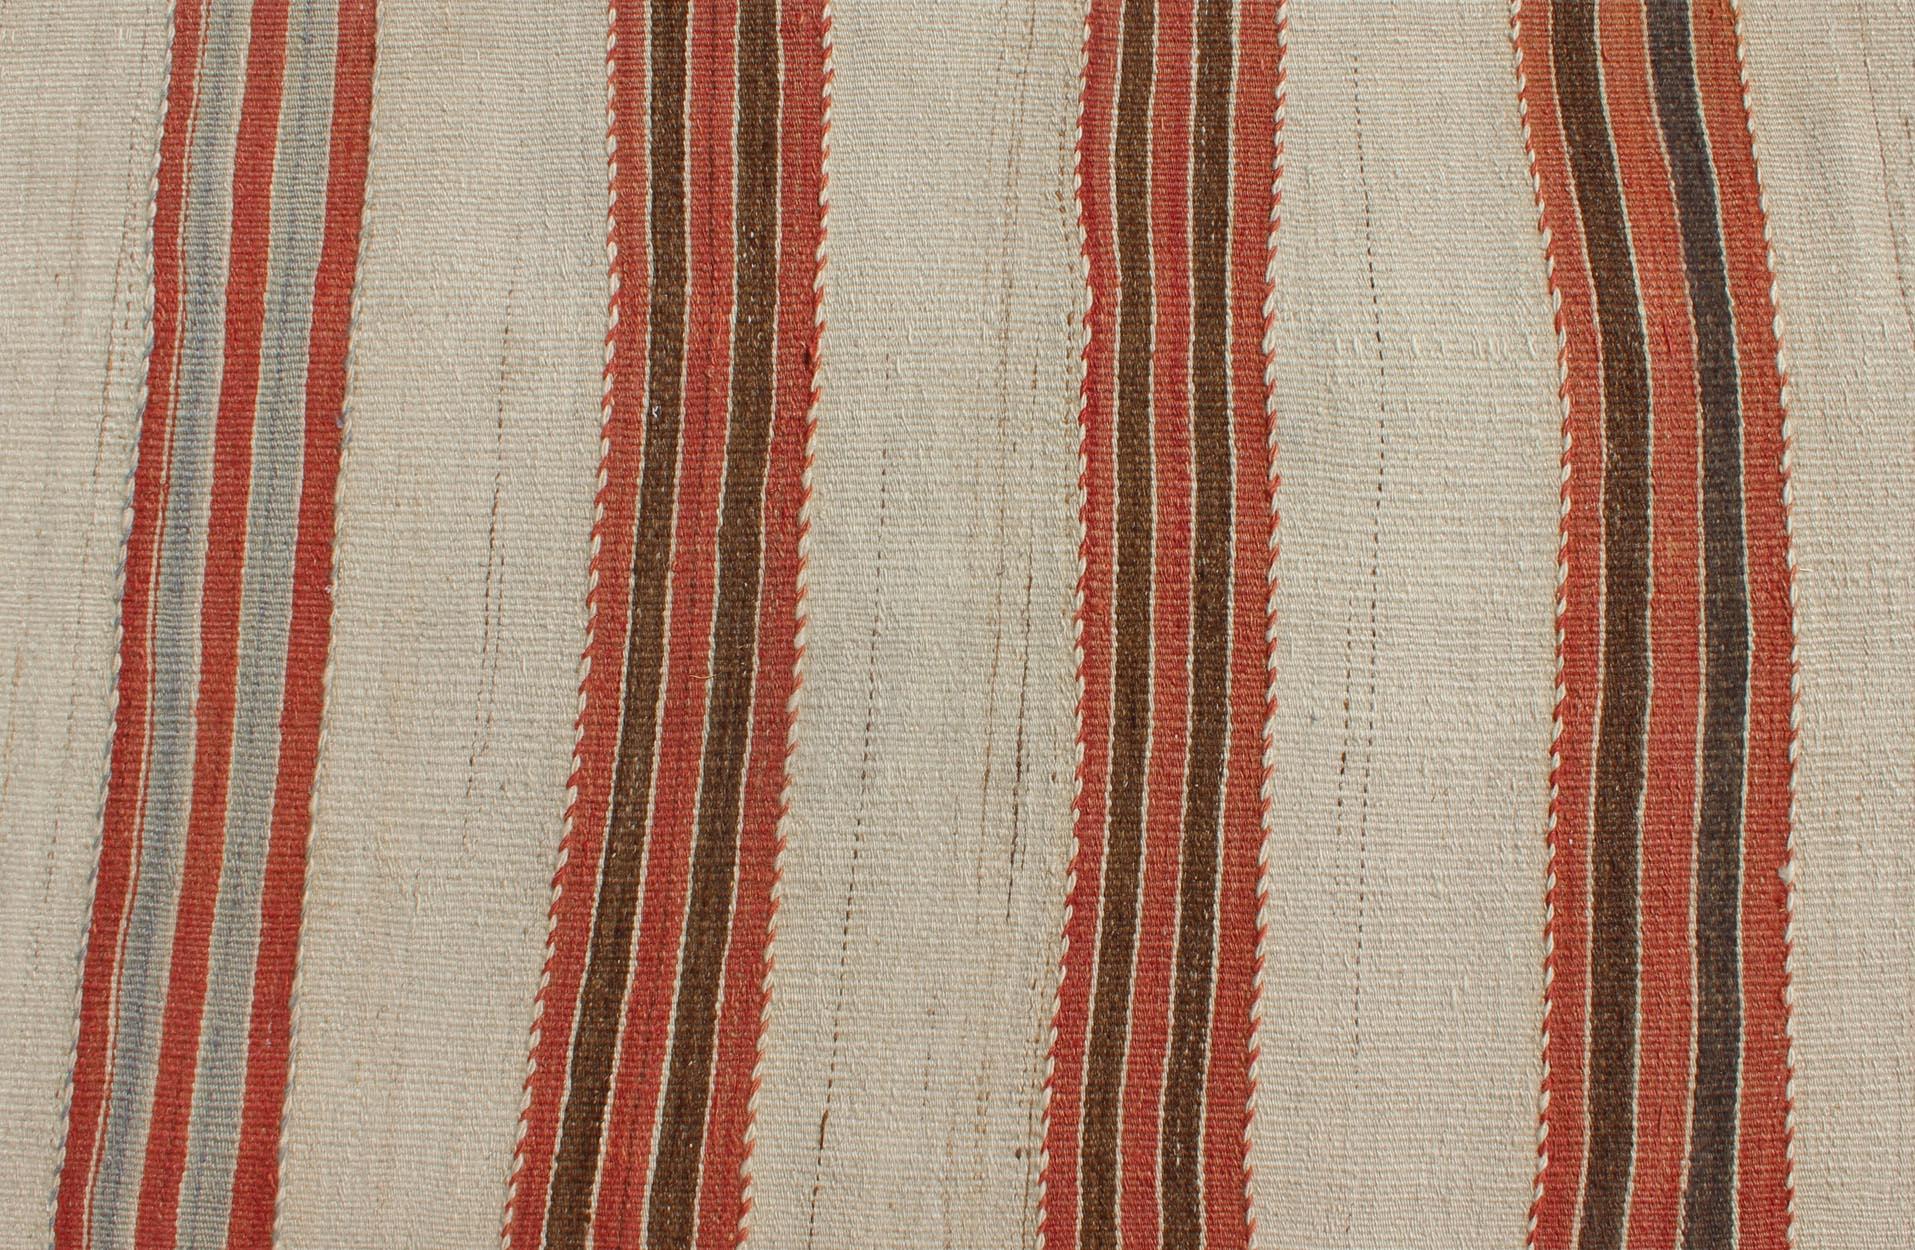 Striped Turkish Vintage Kilim Flat-Weave Rug in Shades of Red, Brown, and Ivory 2